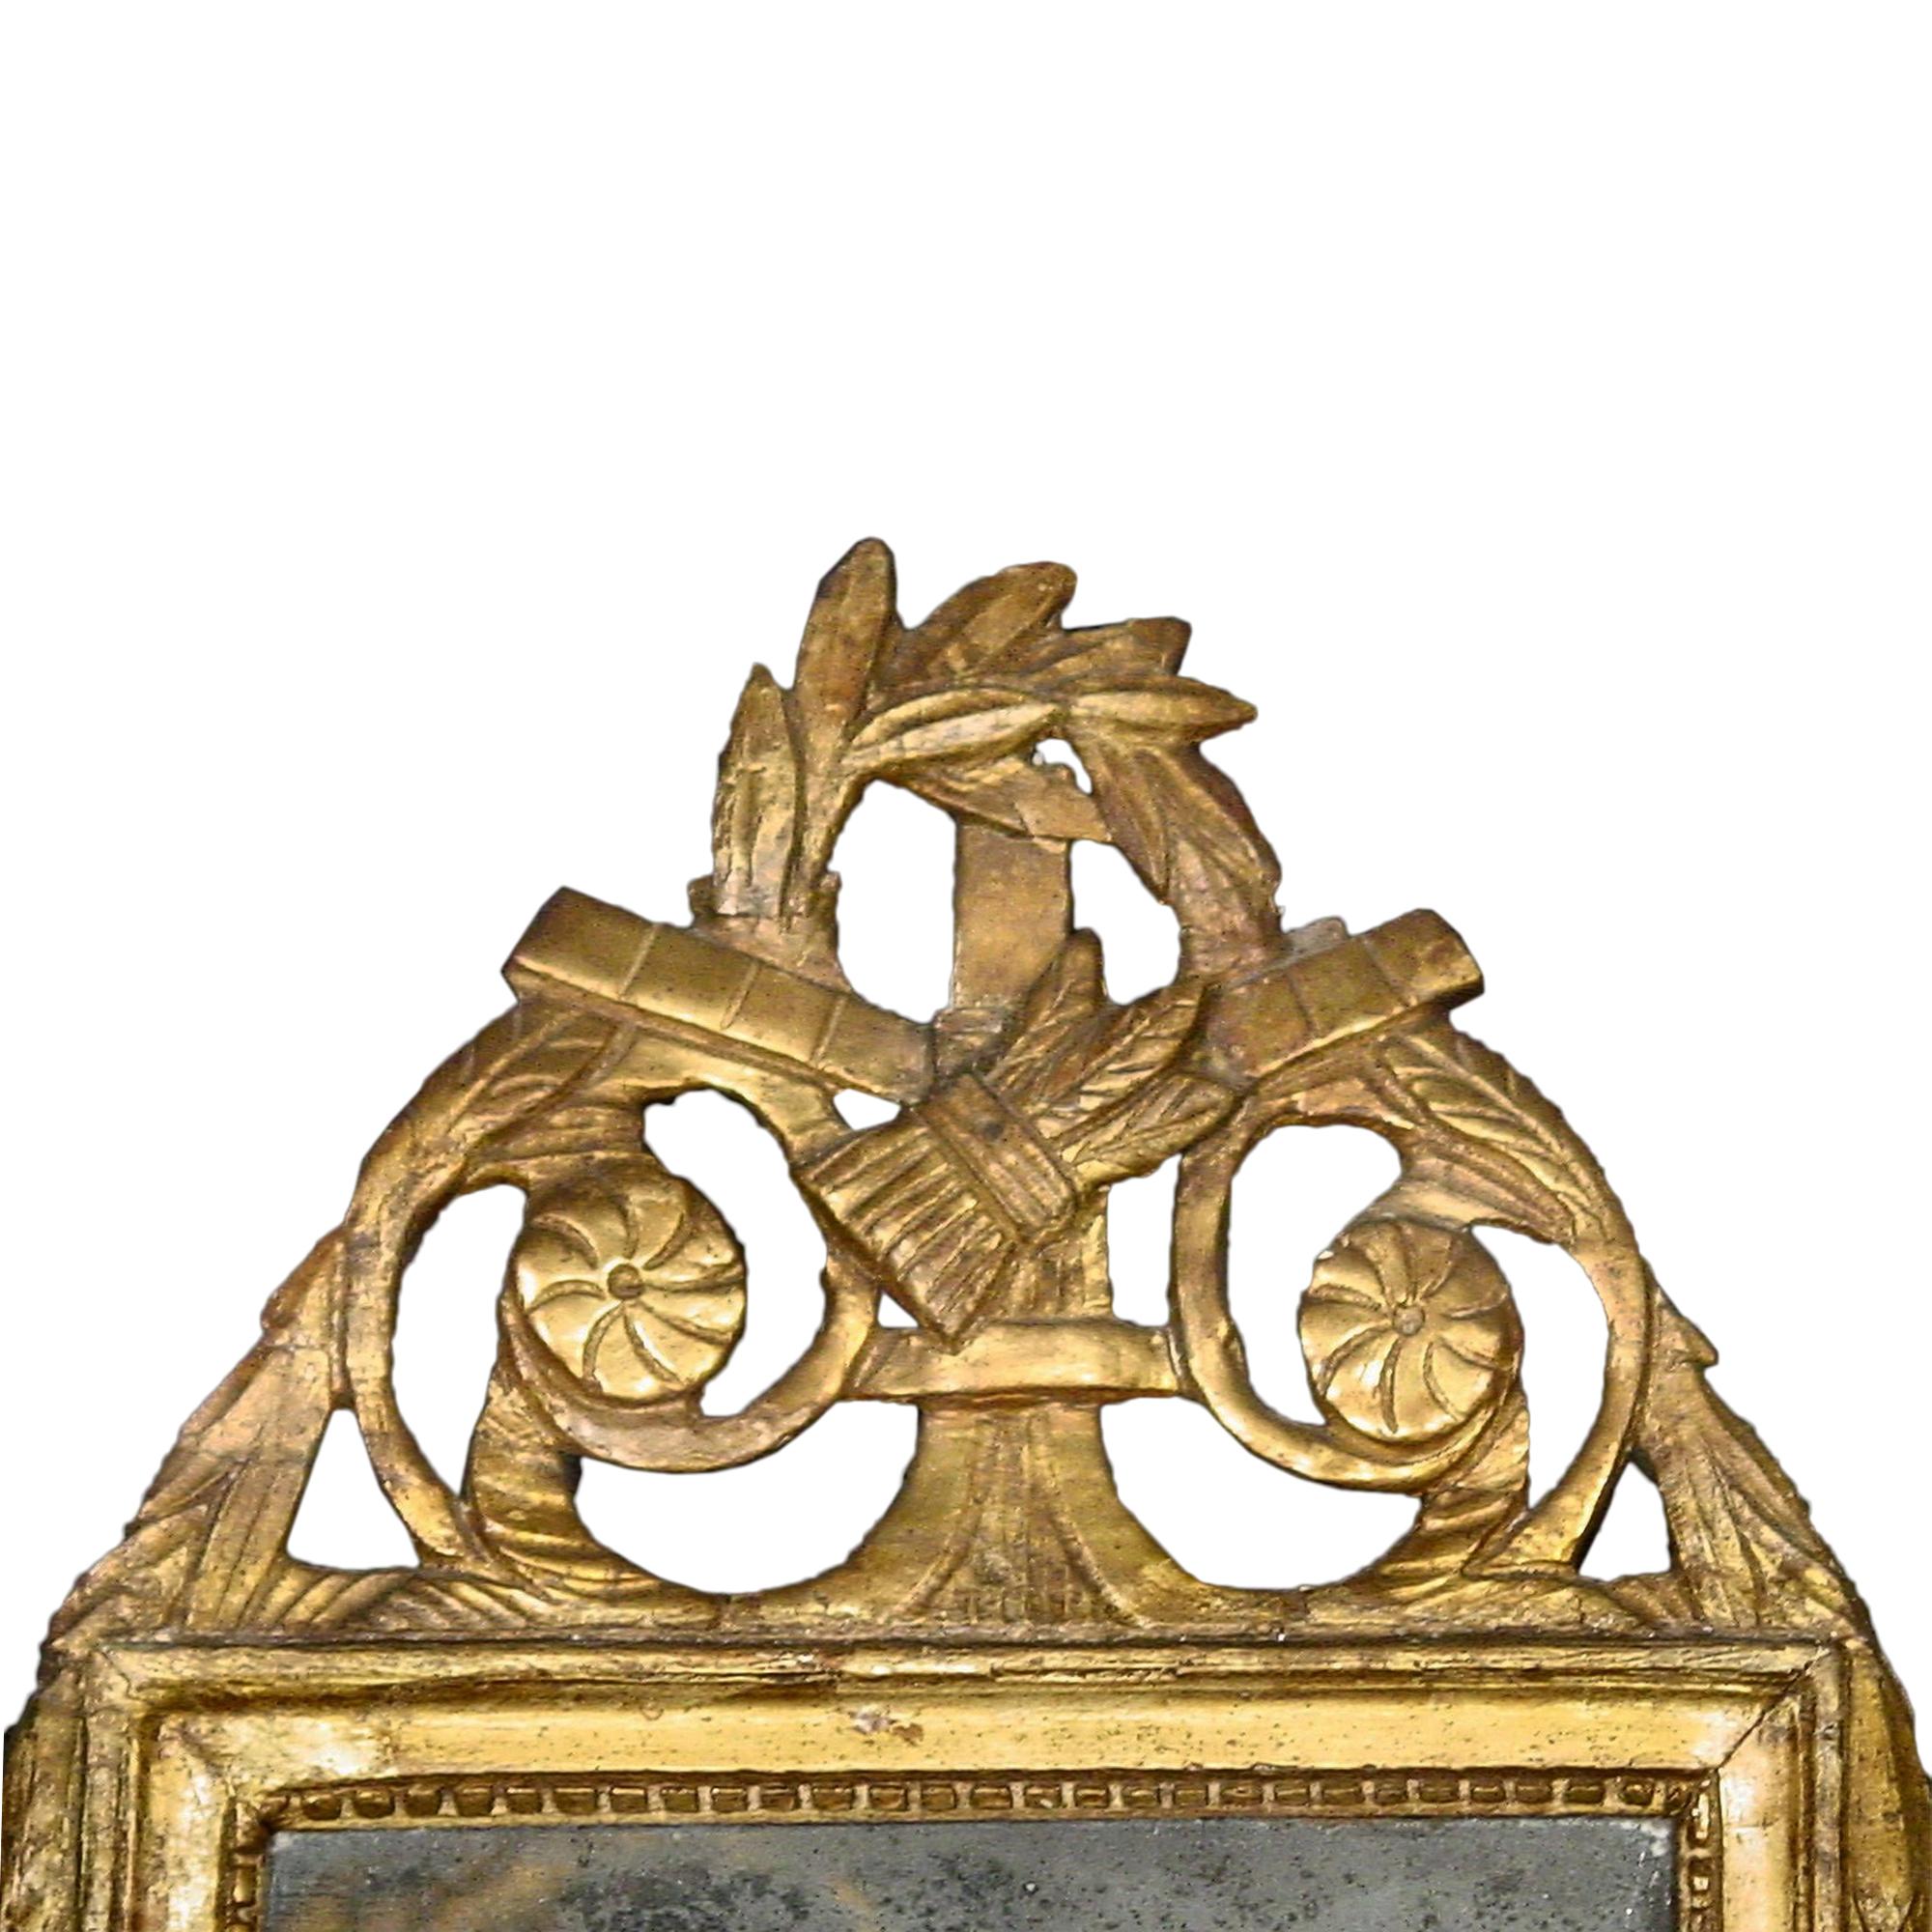 A charming country French 18th century Louis XVI period patinated green and gilt mirror. The top has wonderful gilt carvings of wheat amidst wreaths of foliage and farming tools. Elegant scrolls with rosettes finish the top central reserve. The